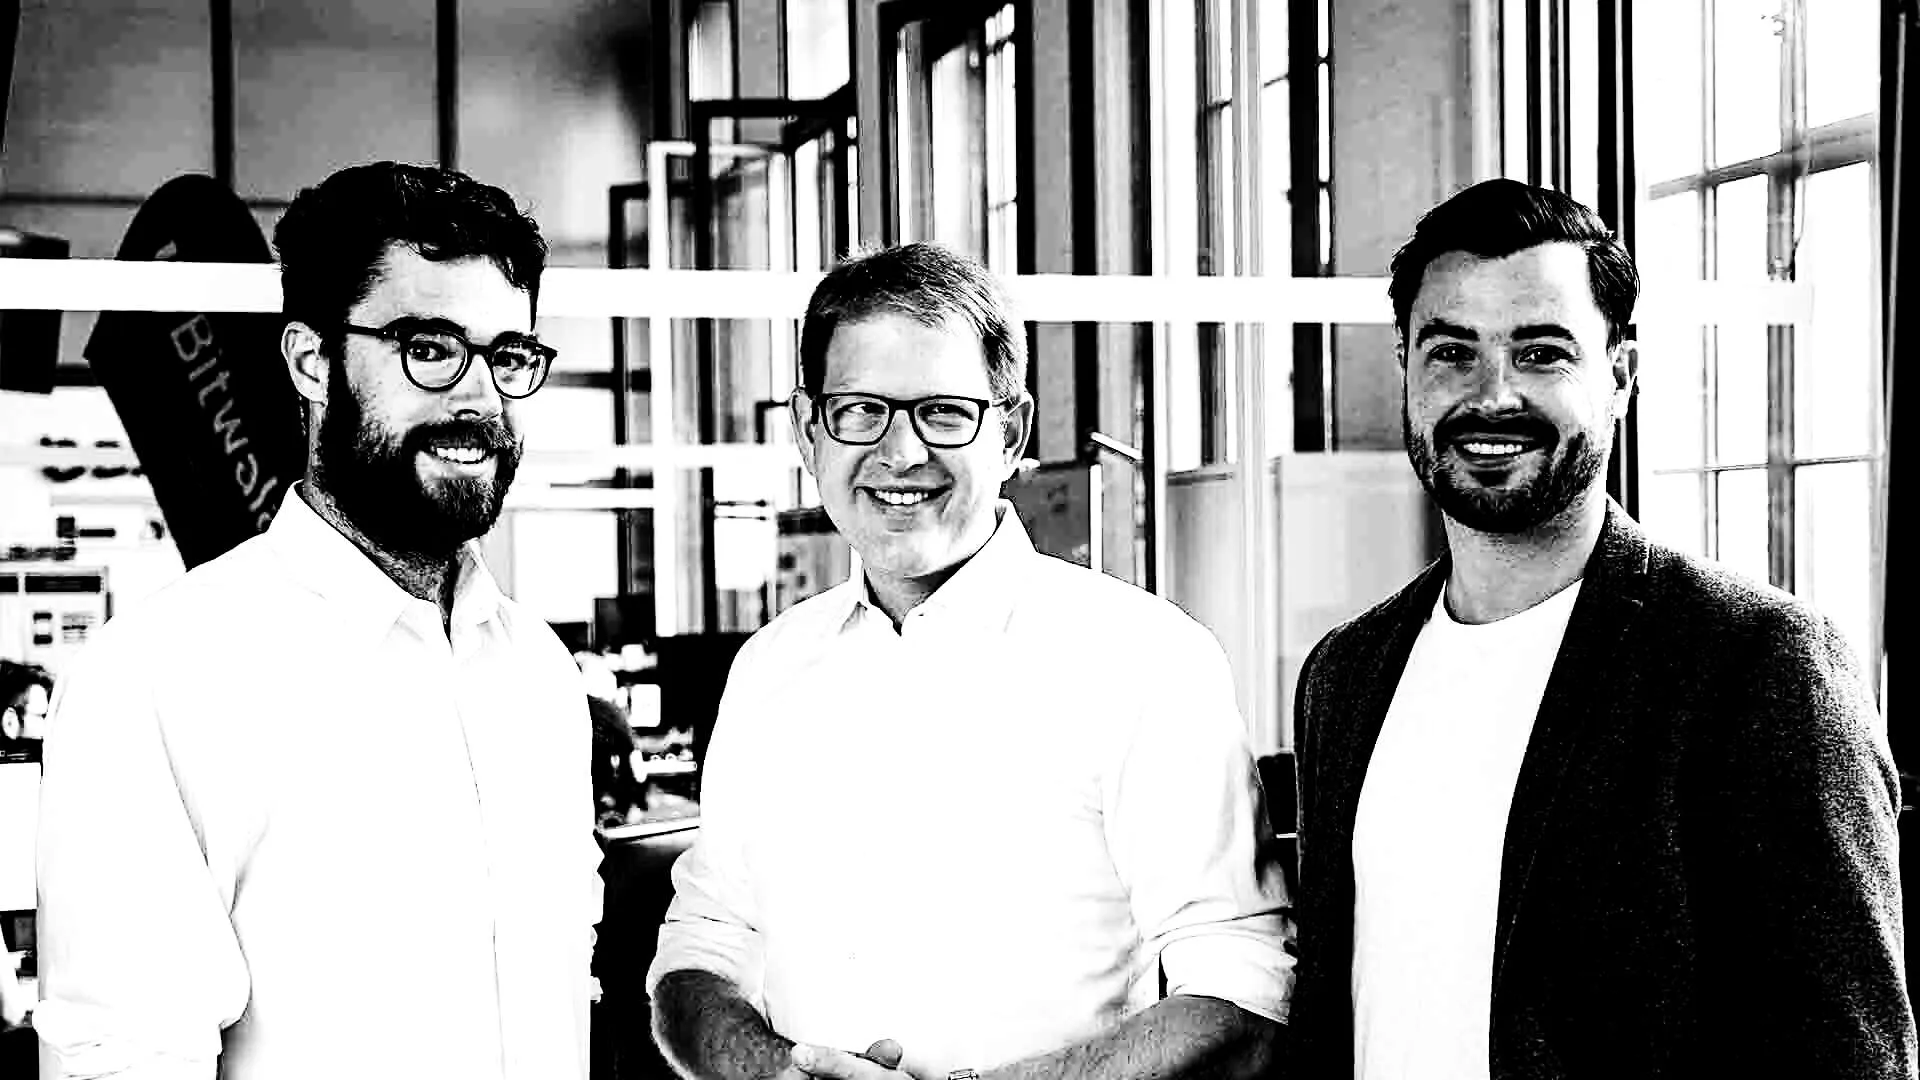 The Bitwala management team. From left to right: Ben Jones, Christoph Iwaniez and Philipp Beer. IMAGE: Bitwala